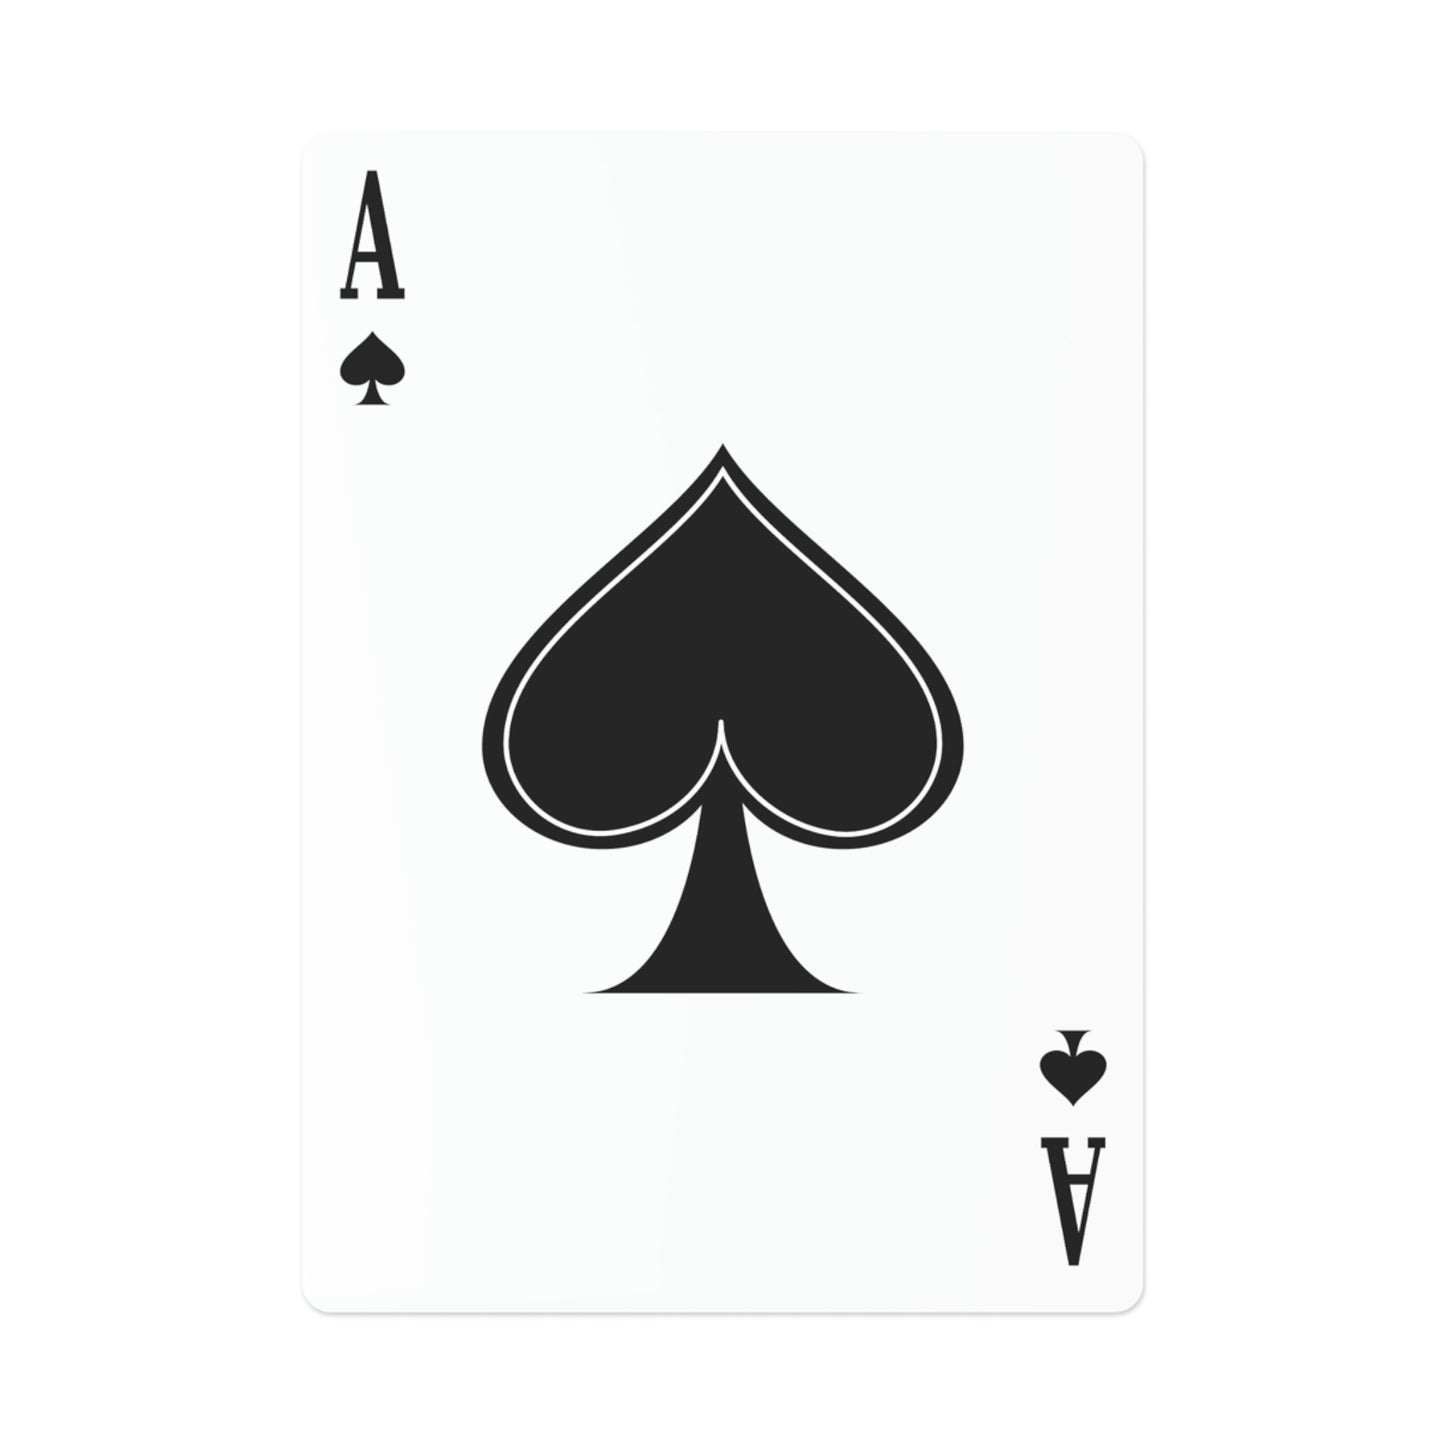 Auden Triller (Is A Killer) - Playing Cards